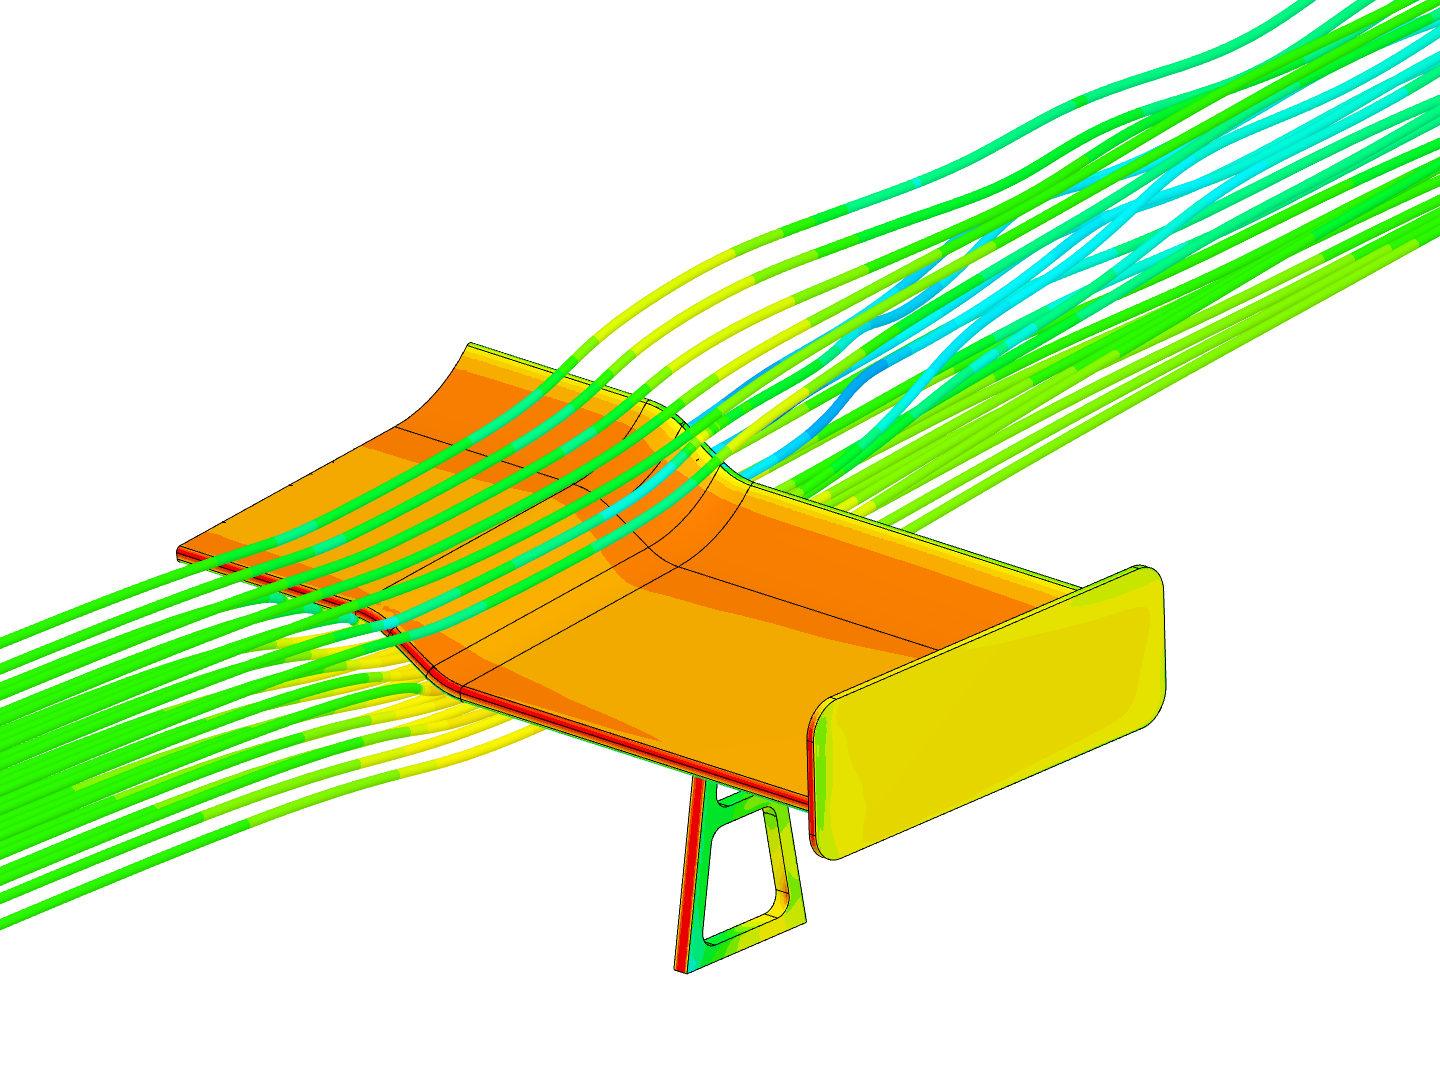 Project 1 - Coursera - Airflow Around a GT Car Spoiler image